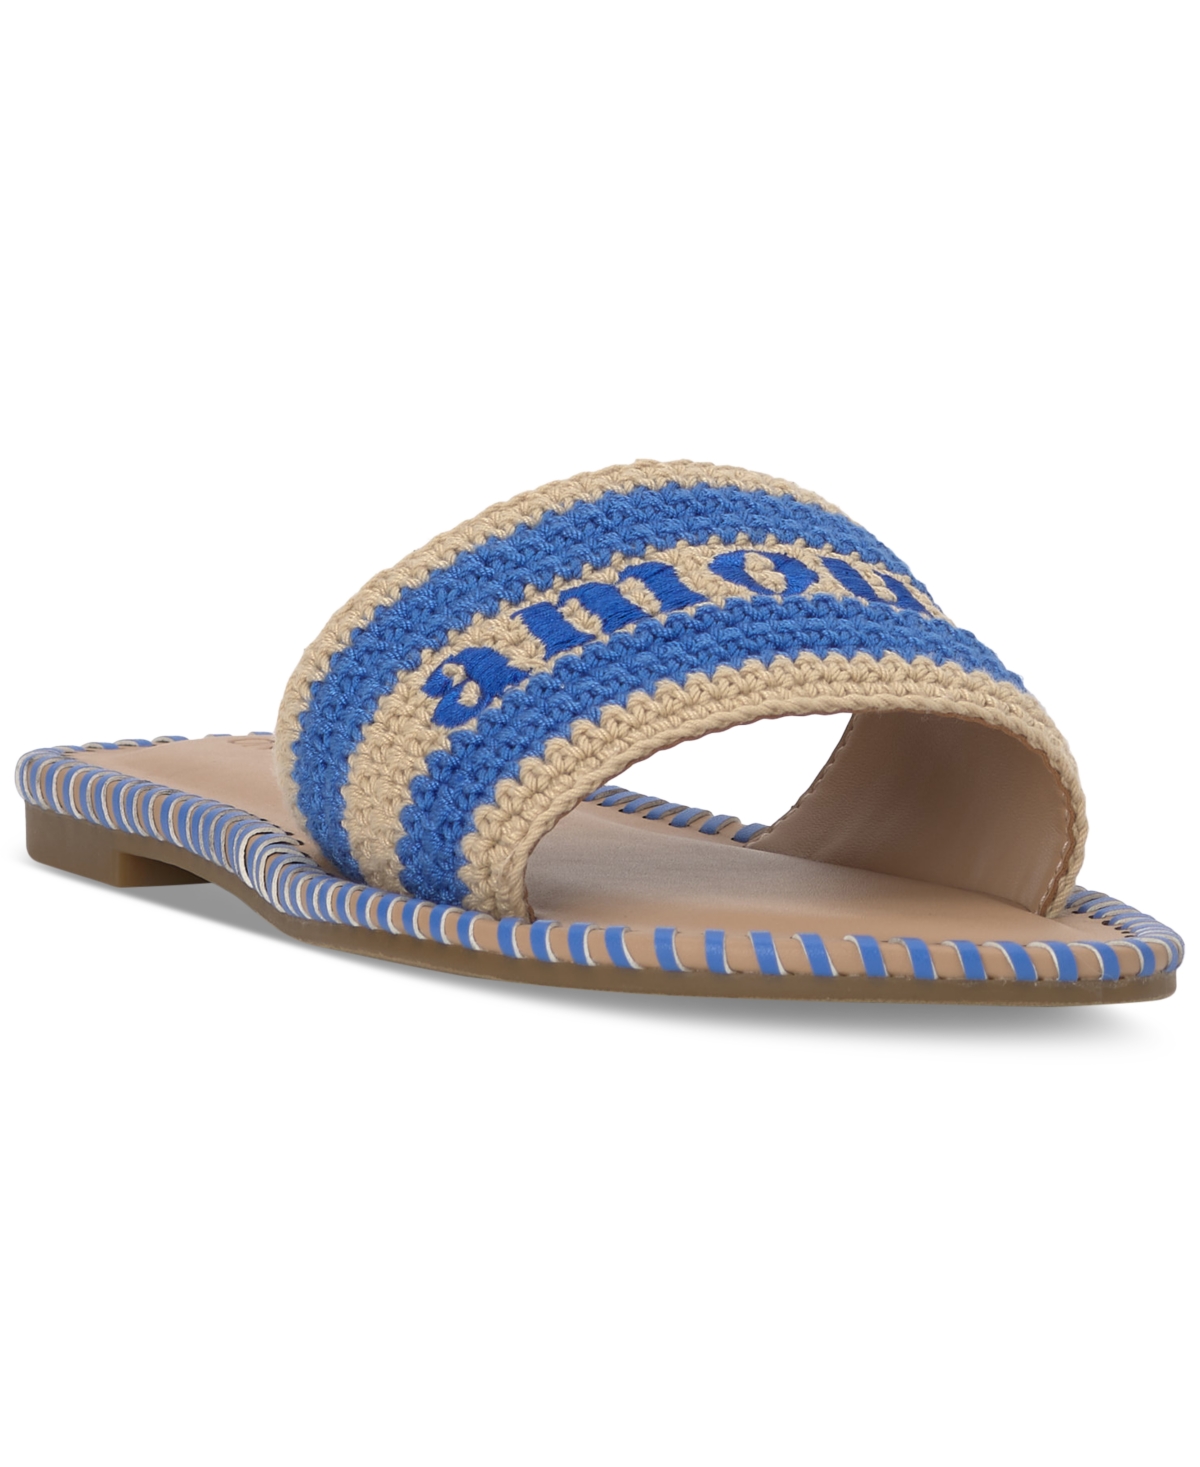 Women's Madelyn Slip-On Woven Flat Sandals, Created for Macy's - Natural/Blue Raffia